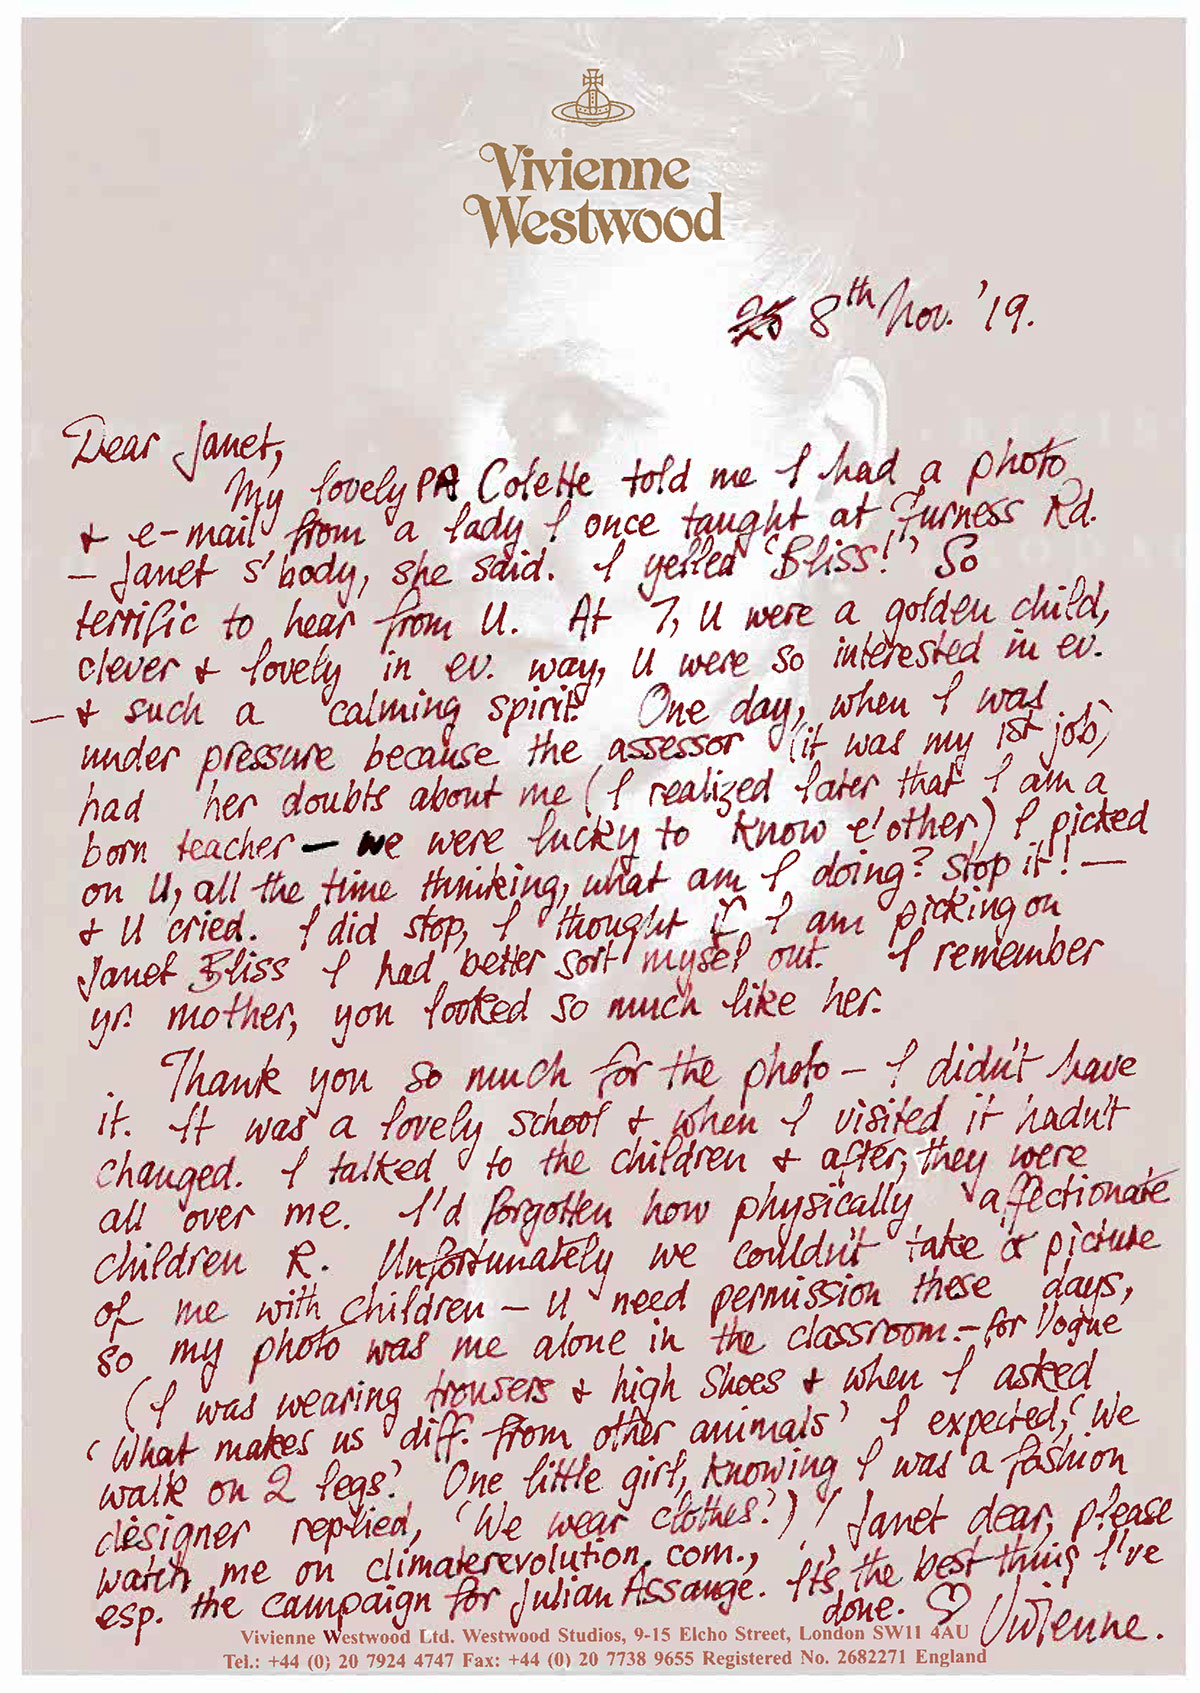 Vivienne's letter to Janet Bliss